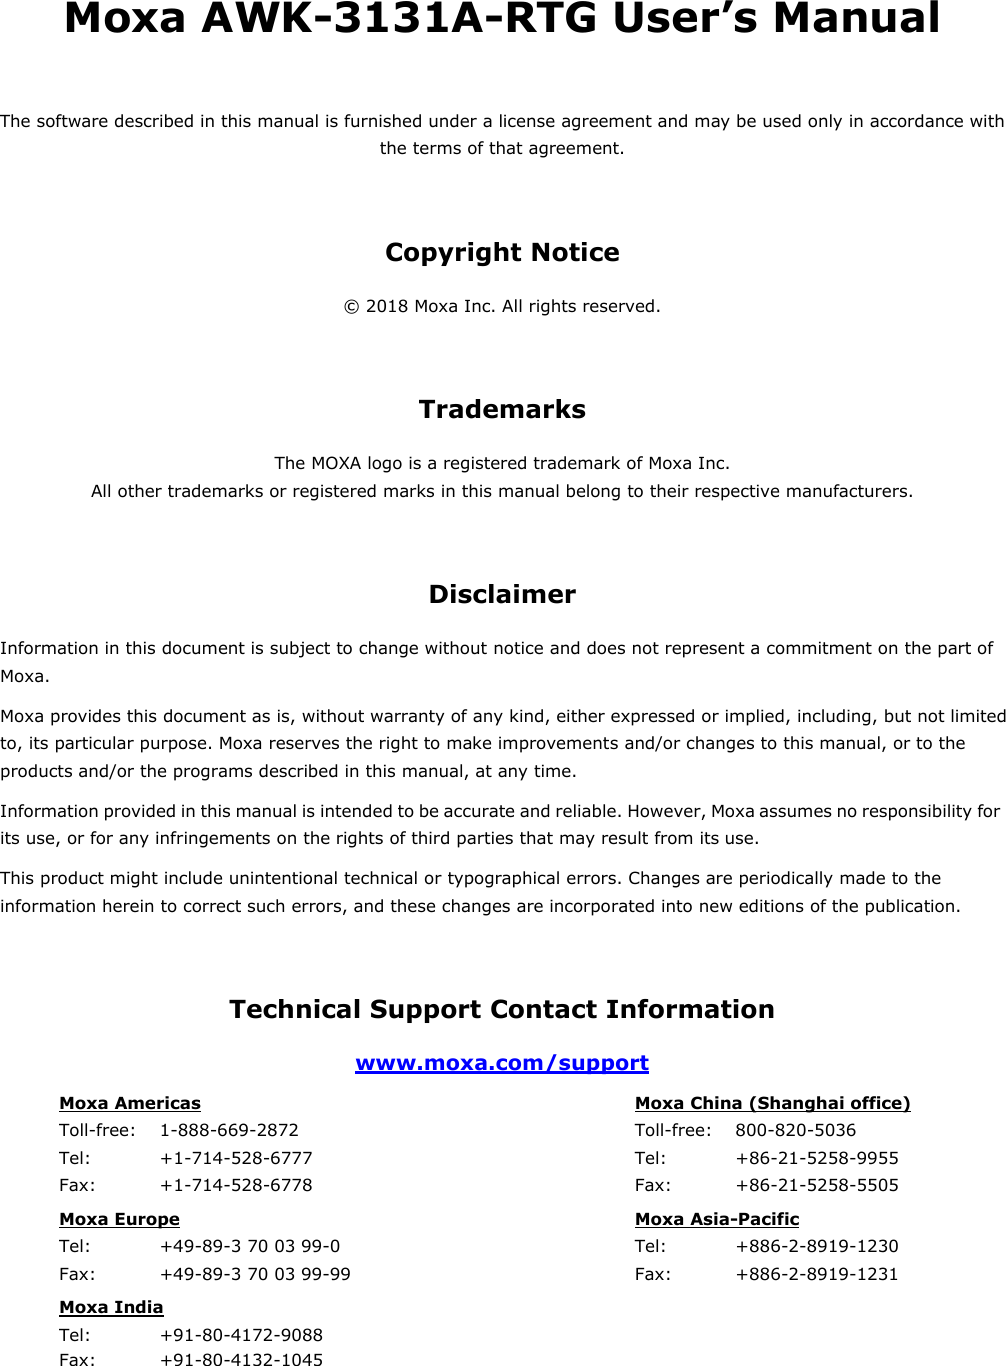 Moxa AWK-3131A-RTG User’s Manual  The software described in this manual is furnished under a license agreement and may be used only in accordance with the terms of that agreement.    Copyright Notice  ©  2018 Moxa Inc. All rights reserved.    Trademarks  The MOXA logo is a registered trademark of Moxa Inc. All other trademarks or registered marks in this manual belong to their respective manufacturers.    Disclaimer  Information in this document is subject to change without notice and does not represent a commitment on the part of Moxa. Moxa provides this document as is, without warranty of any kind, either expressed or implied, including, but not limited to, its particular purpose. Moxa reserves the right to make improvements and/or changes to this manual, or to the products and/or the programs described in this manual, at any time. Information provided in this manual is intended to be accurate and reliable. However, Moxa assumes no responsibility for its use, or for any infringements on the rights of third parties that may result from its use. This product might include unintentional technical or typographical errors. Changes are periodically made to the information herein to correct such errors, and these changes are incorporated into new editions of the publication.    Technical Support Contact Information www.moxa.com/support  Moxa Americas Toll-free:  1-888-669-2872 Tel:  +1-714-528-6777 Fax:  +1-714-528-6778 Moxa China (Shanghai office) Toll-free:  800-820-5036 Tel:  +86-21-5258-9955 Fax:  +86-21-5258-5505 Moxa Europe Tel:  +49-89-3 70 03 99-0 Fax:  +49-89-3 70 03 99-99 Moxa Asia-Pacific Tel:  +886-2-8919-1230 Fax:  +886-2-8919-1231 Moxa India Tel:  +91-80-4172-9088 Fax:  +91-80-4132-1045  